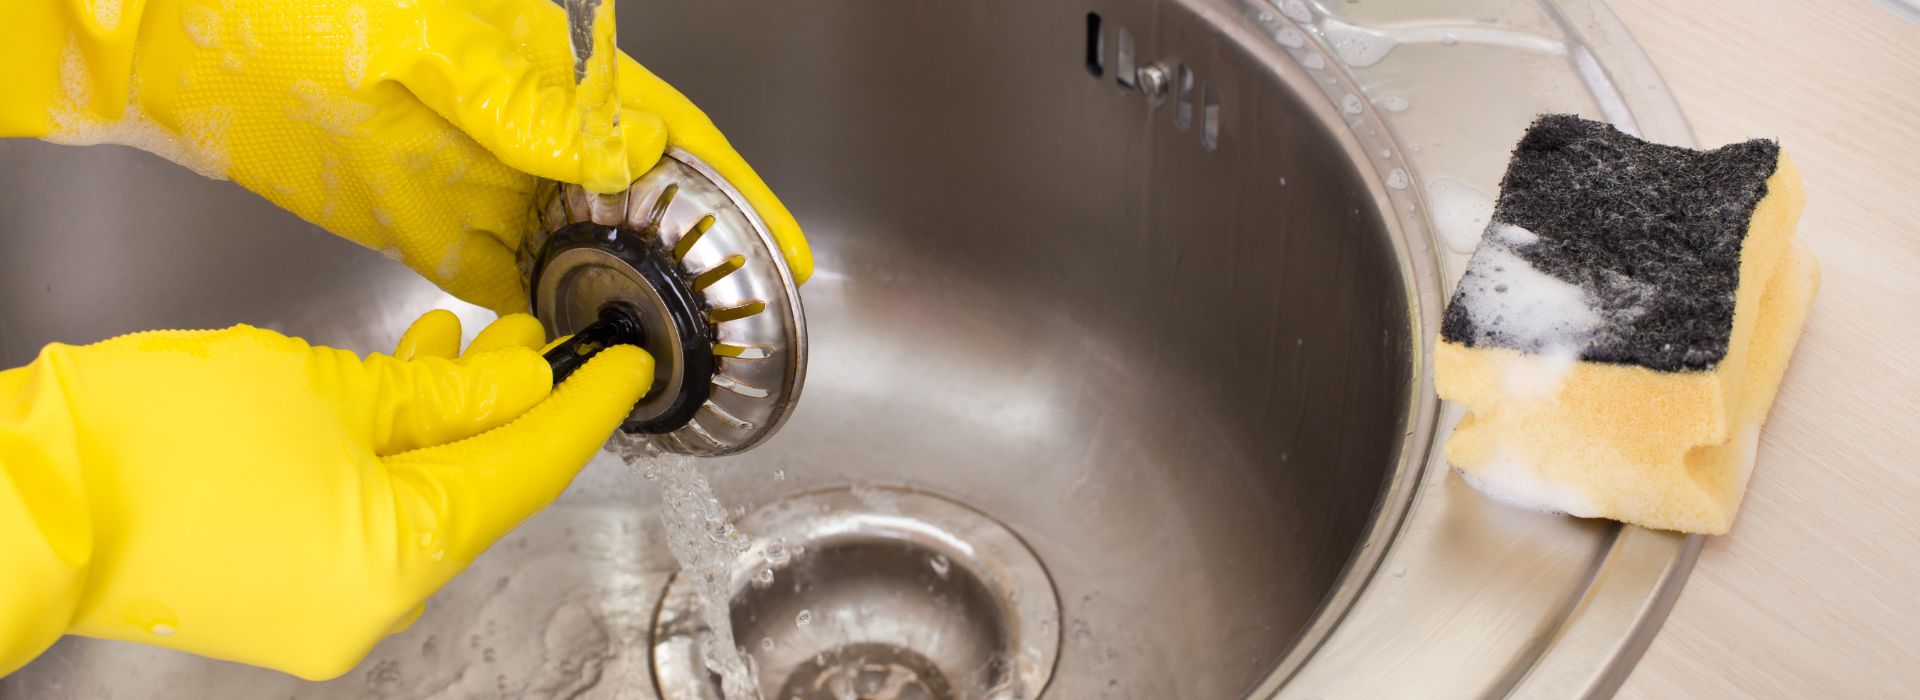 Professionals In Drain Cleaning